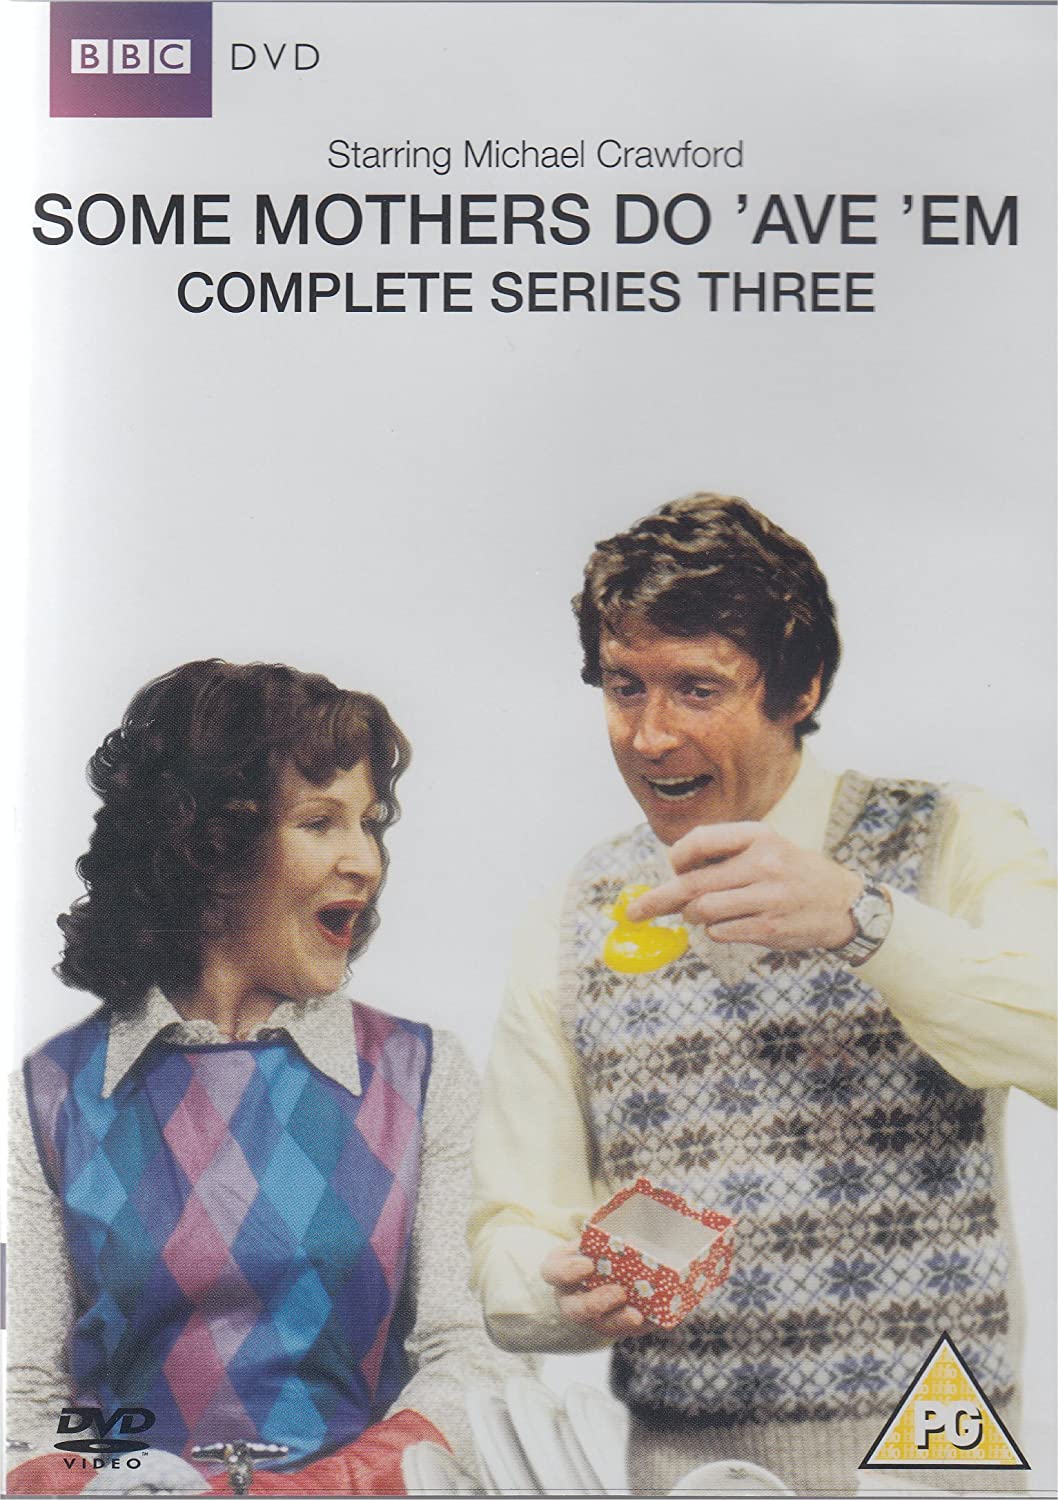 Some Mothers Do 'ave 'em - Complete Series 3 (BBC) [DVD]